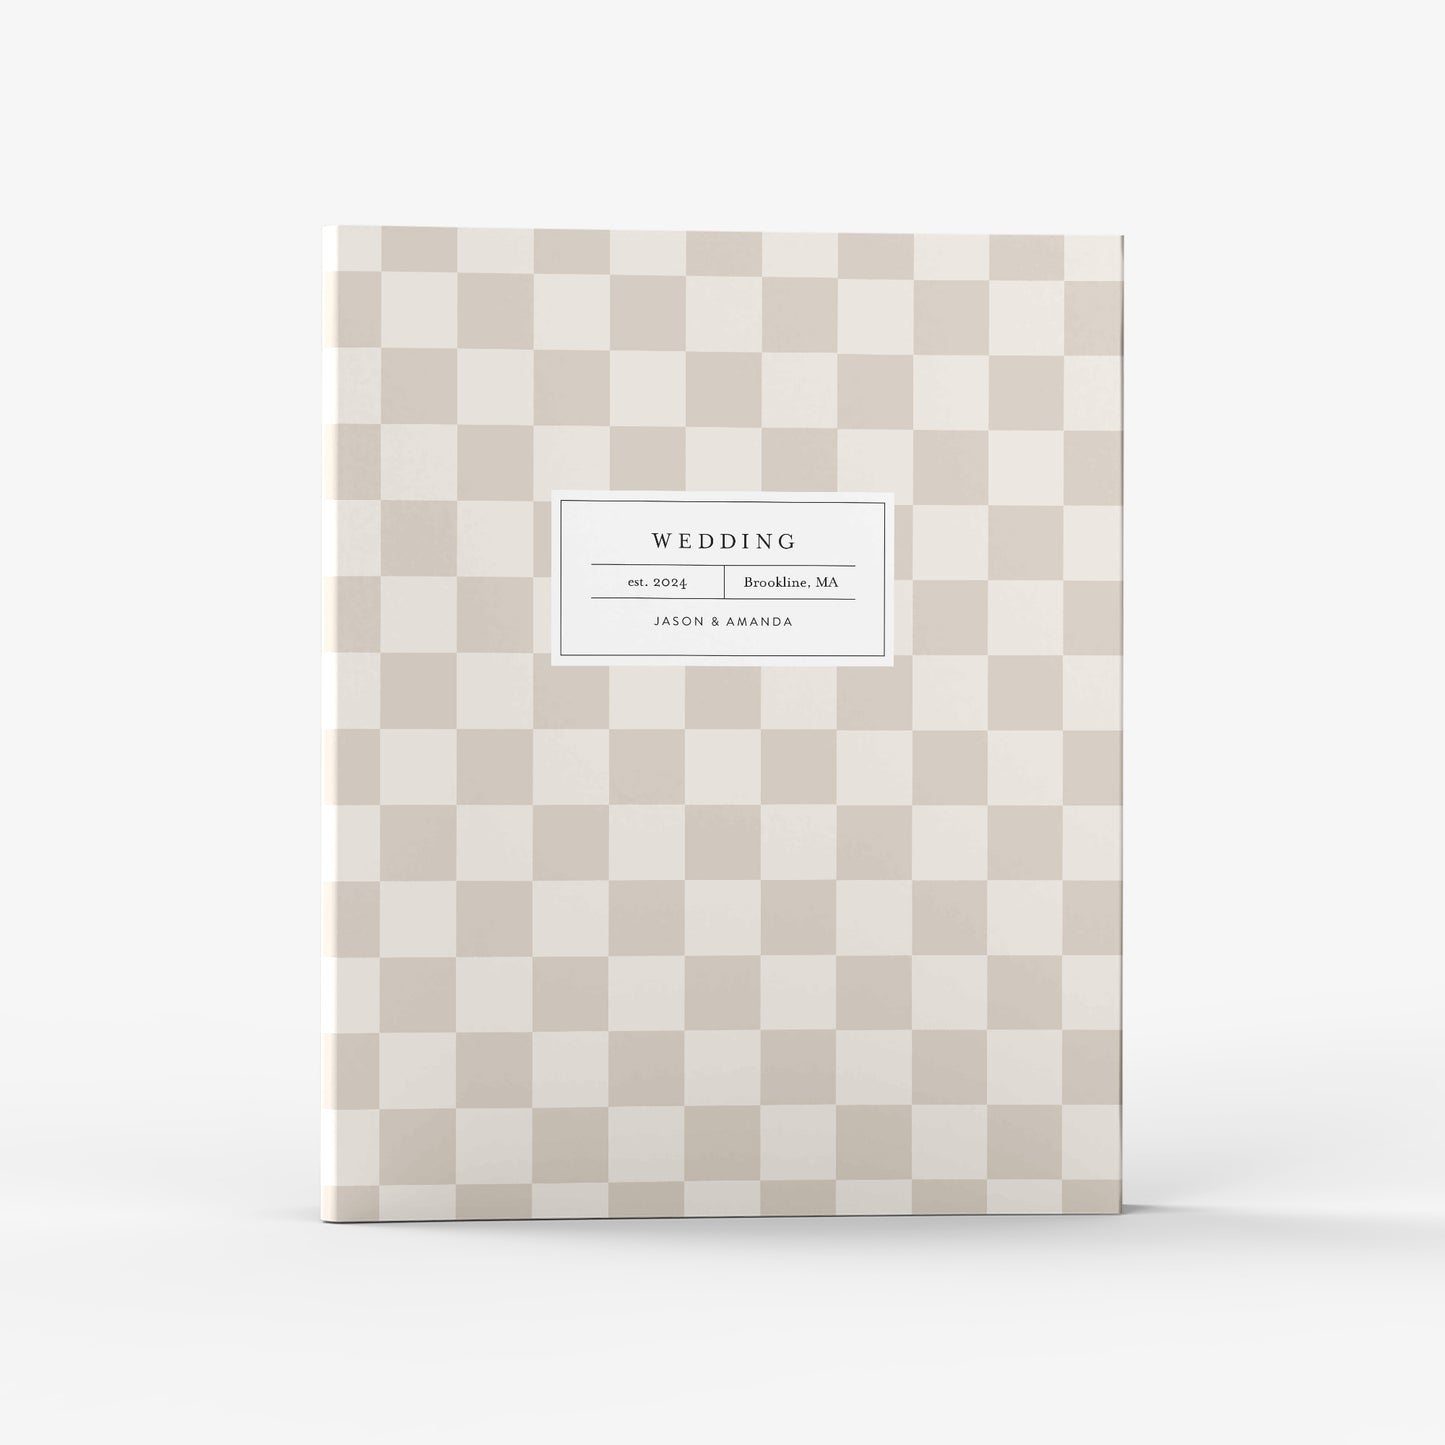 Our wedding binders are the perfect planning tool, shown in a trendy checkerboard pattern